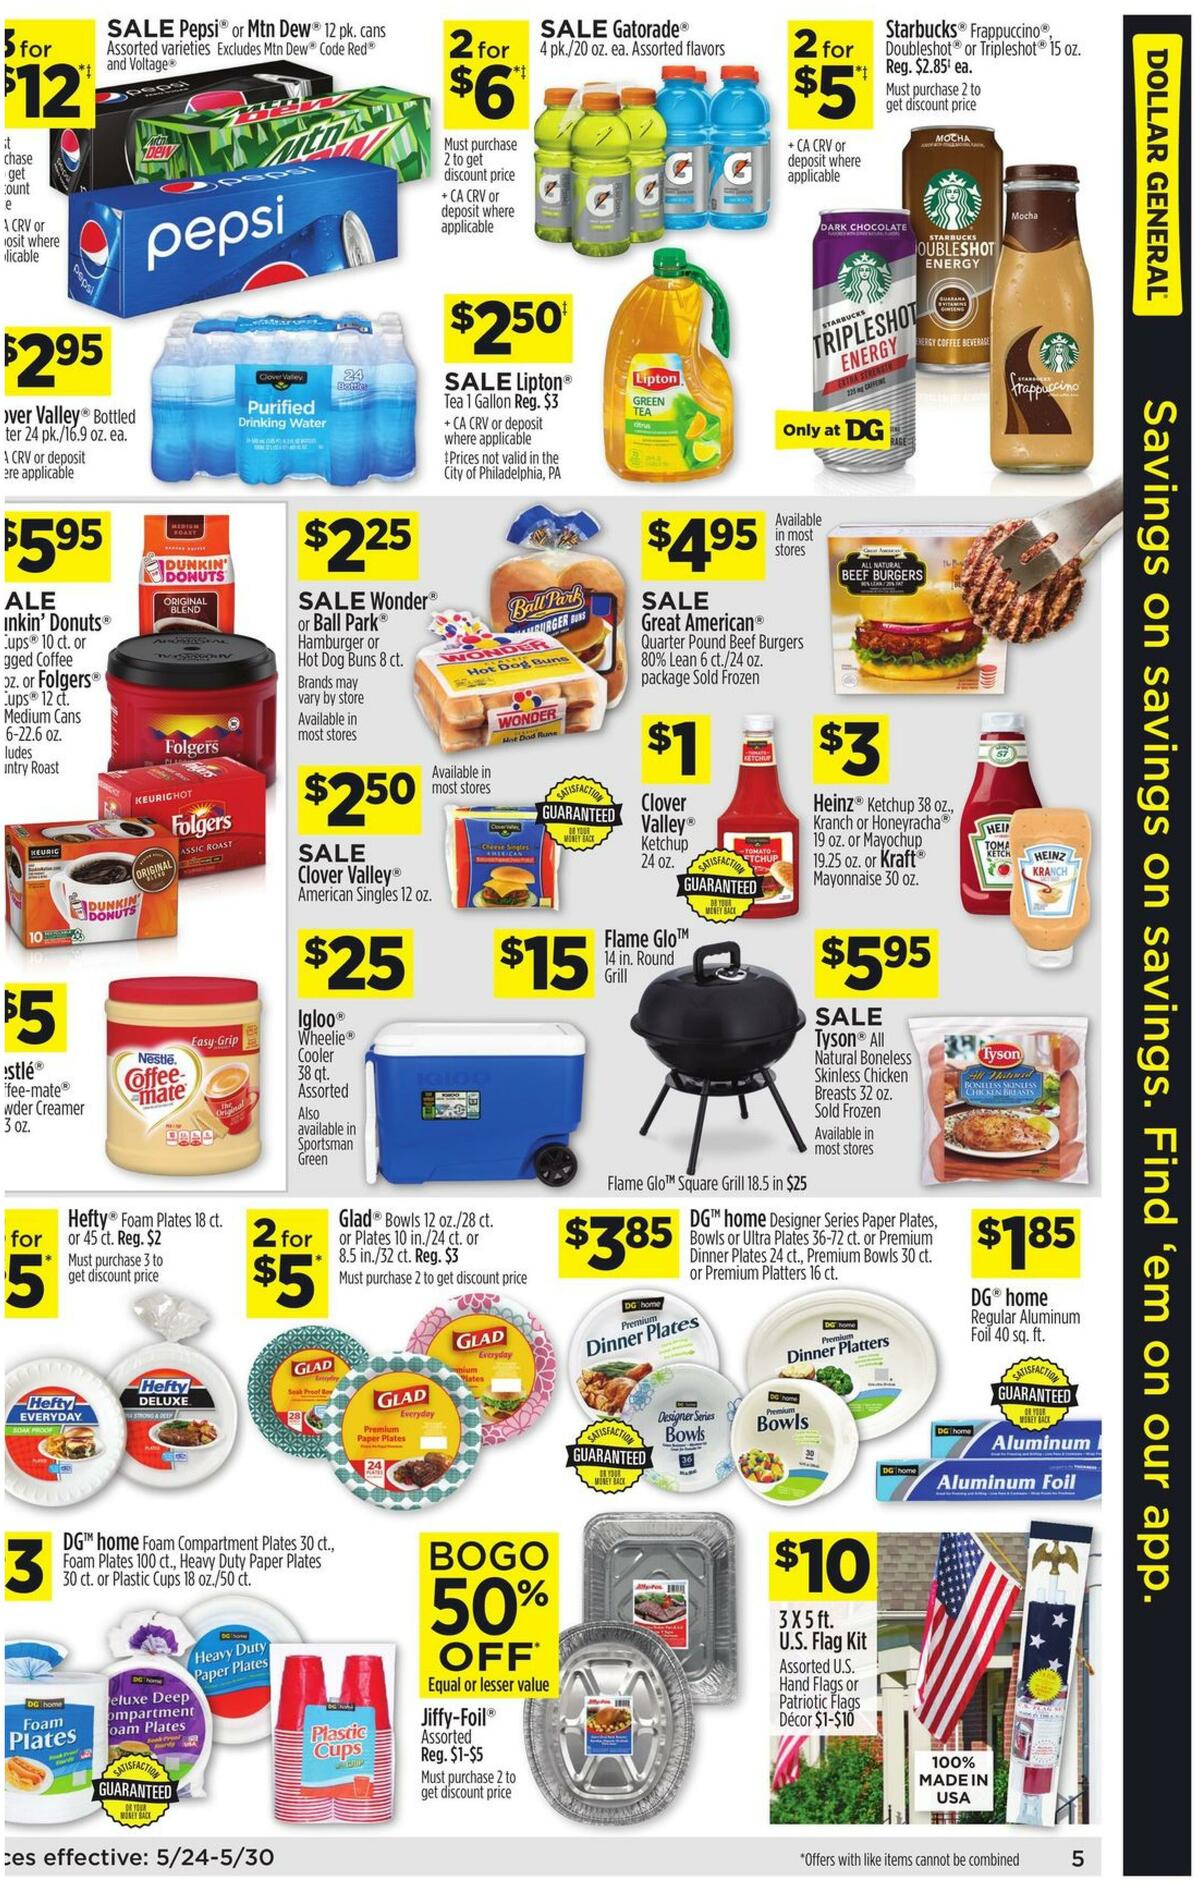 Dollar General Weekly Ad from May 24